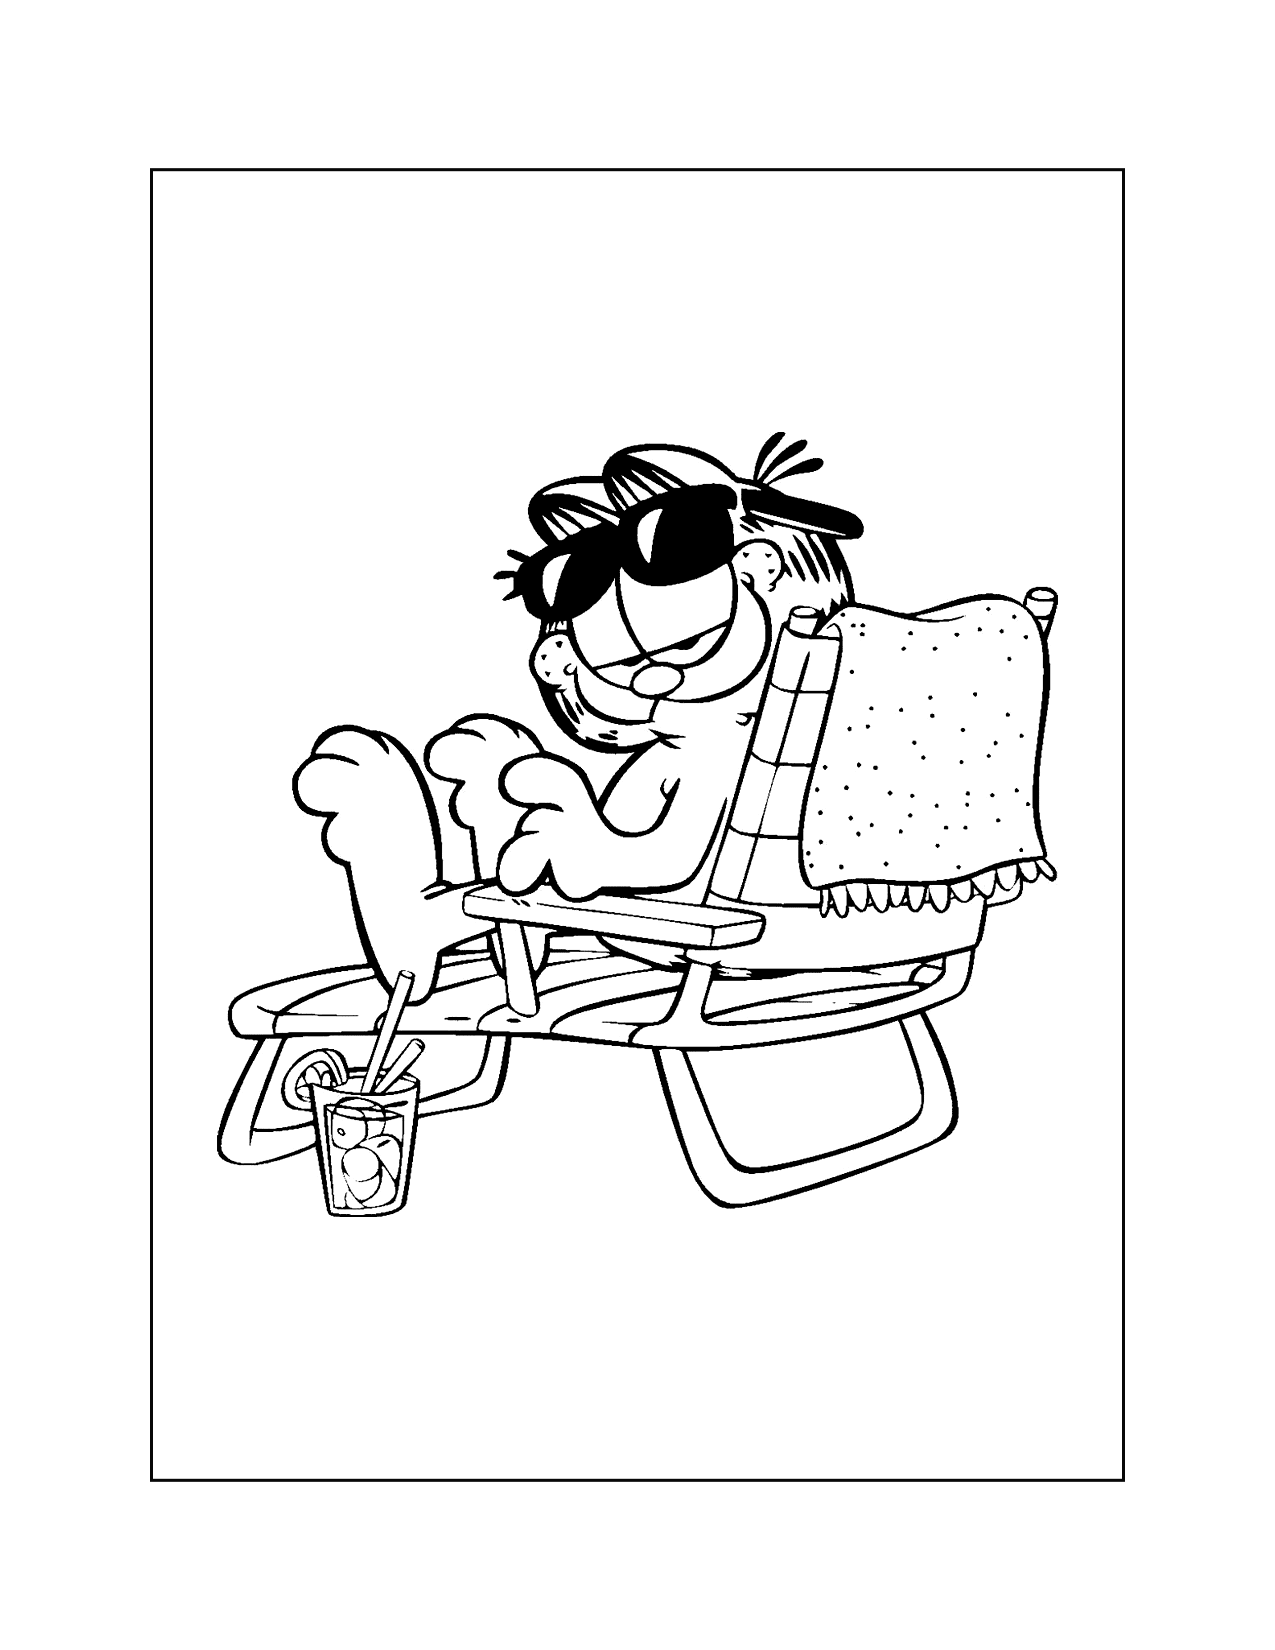 Garfield Relaxing At The Pool Coloring Page